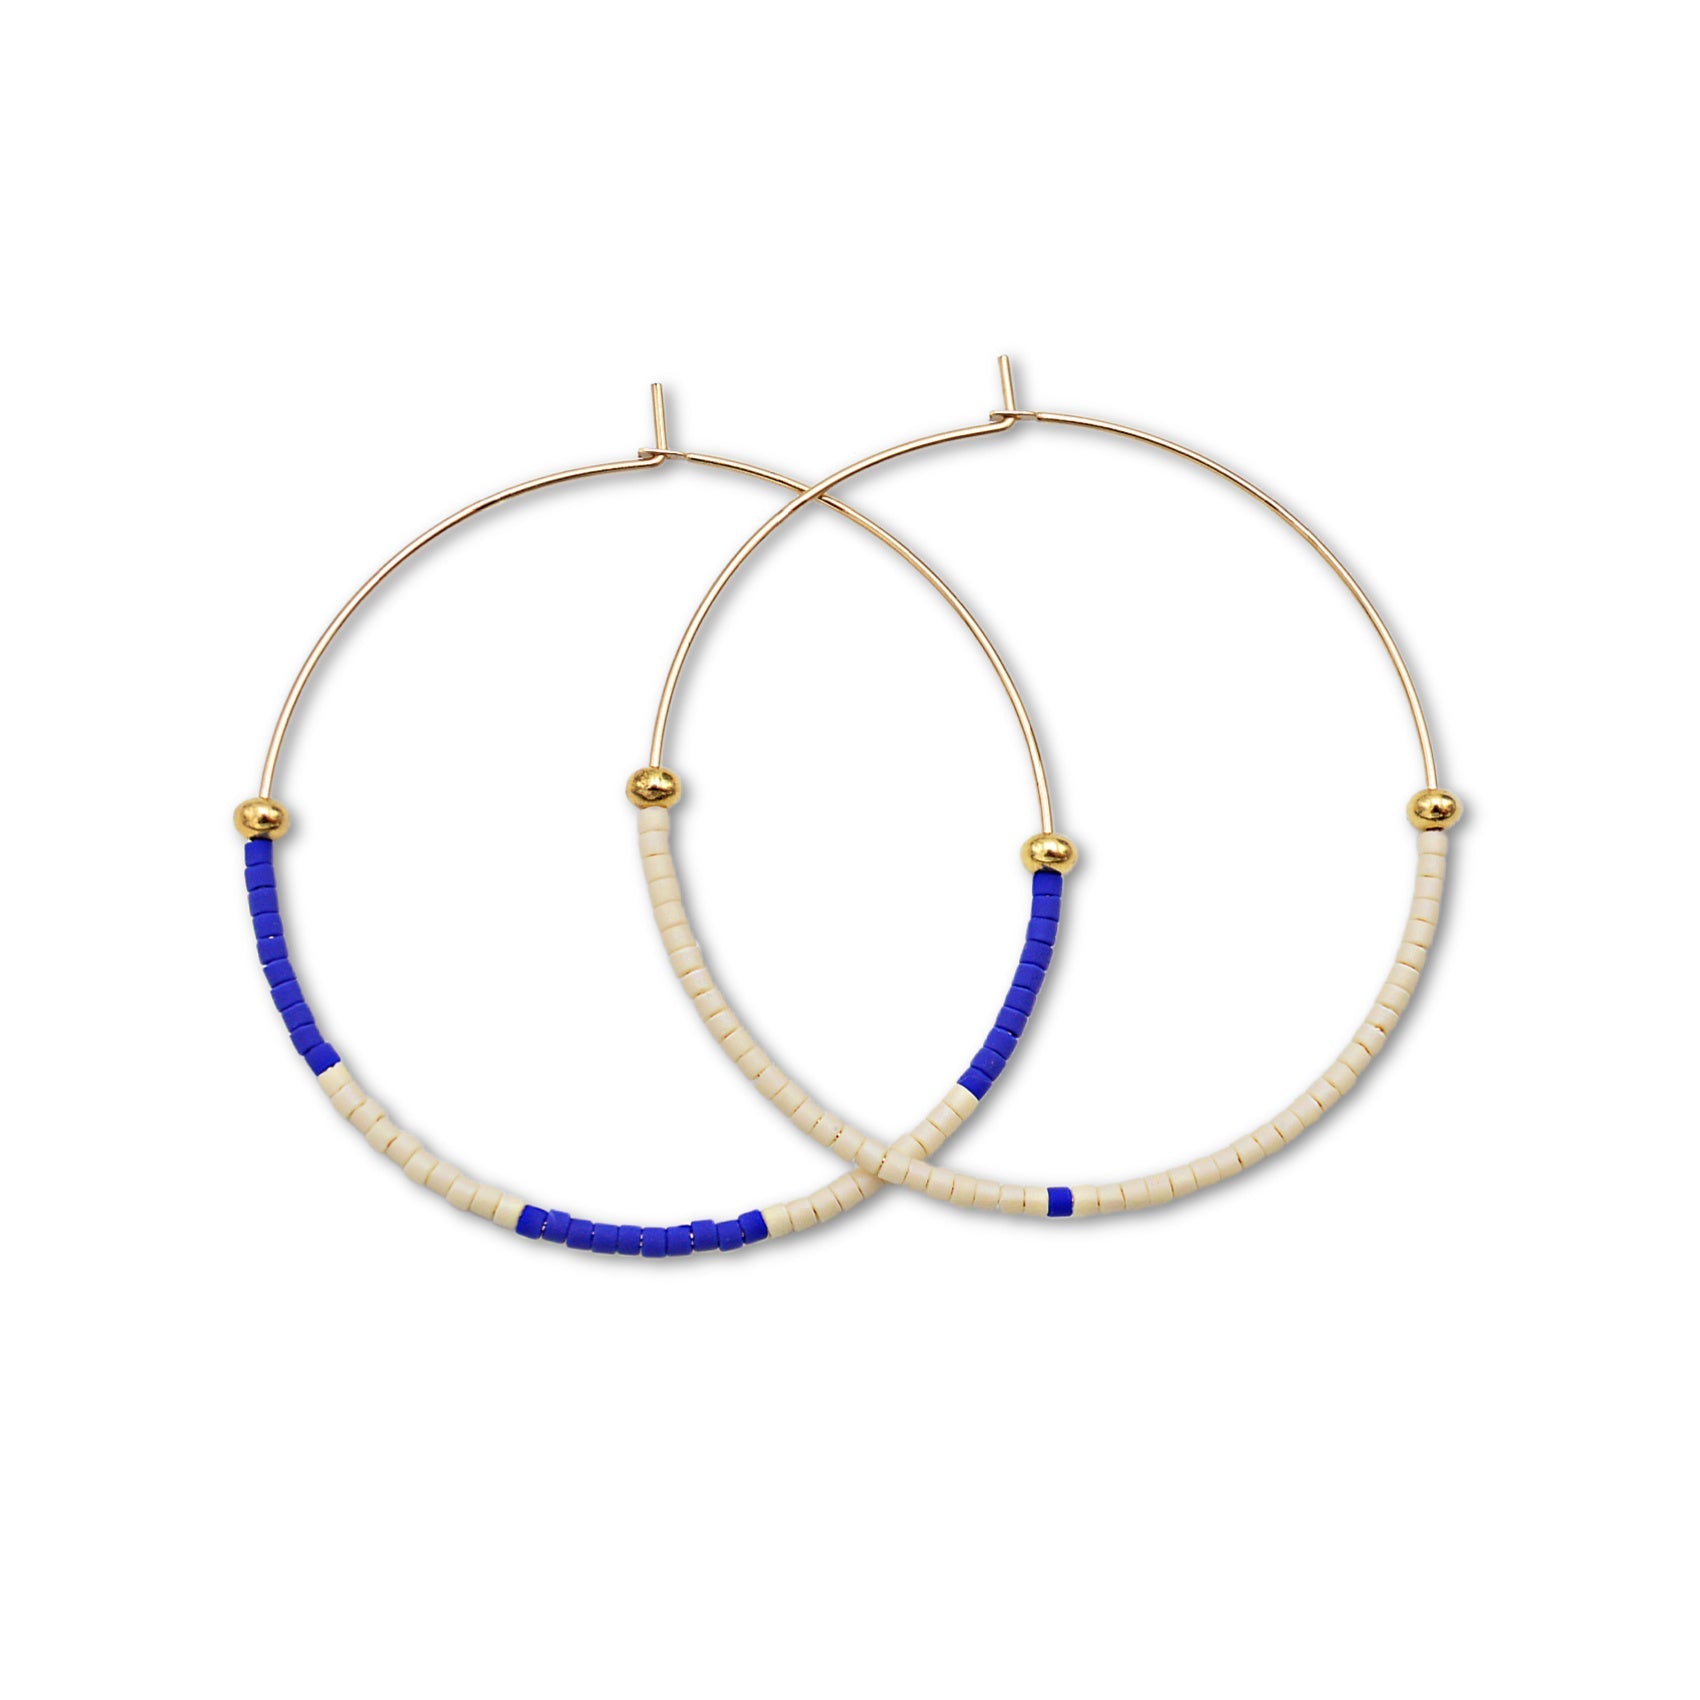 Cobalt Blue and White Delica Glass Beaded on gold filled hoops